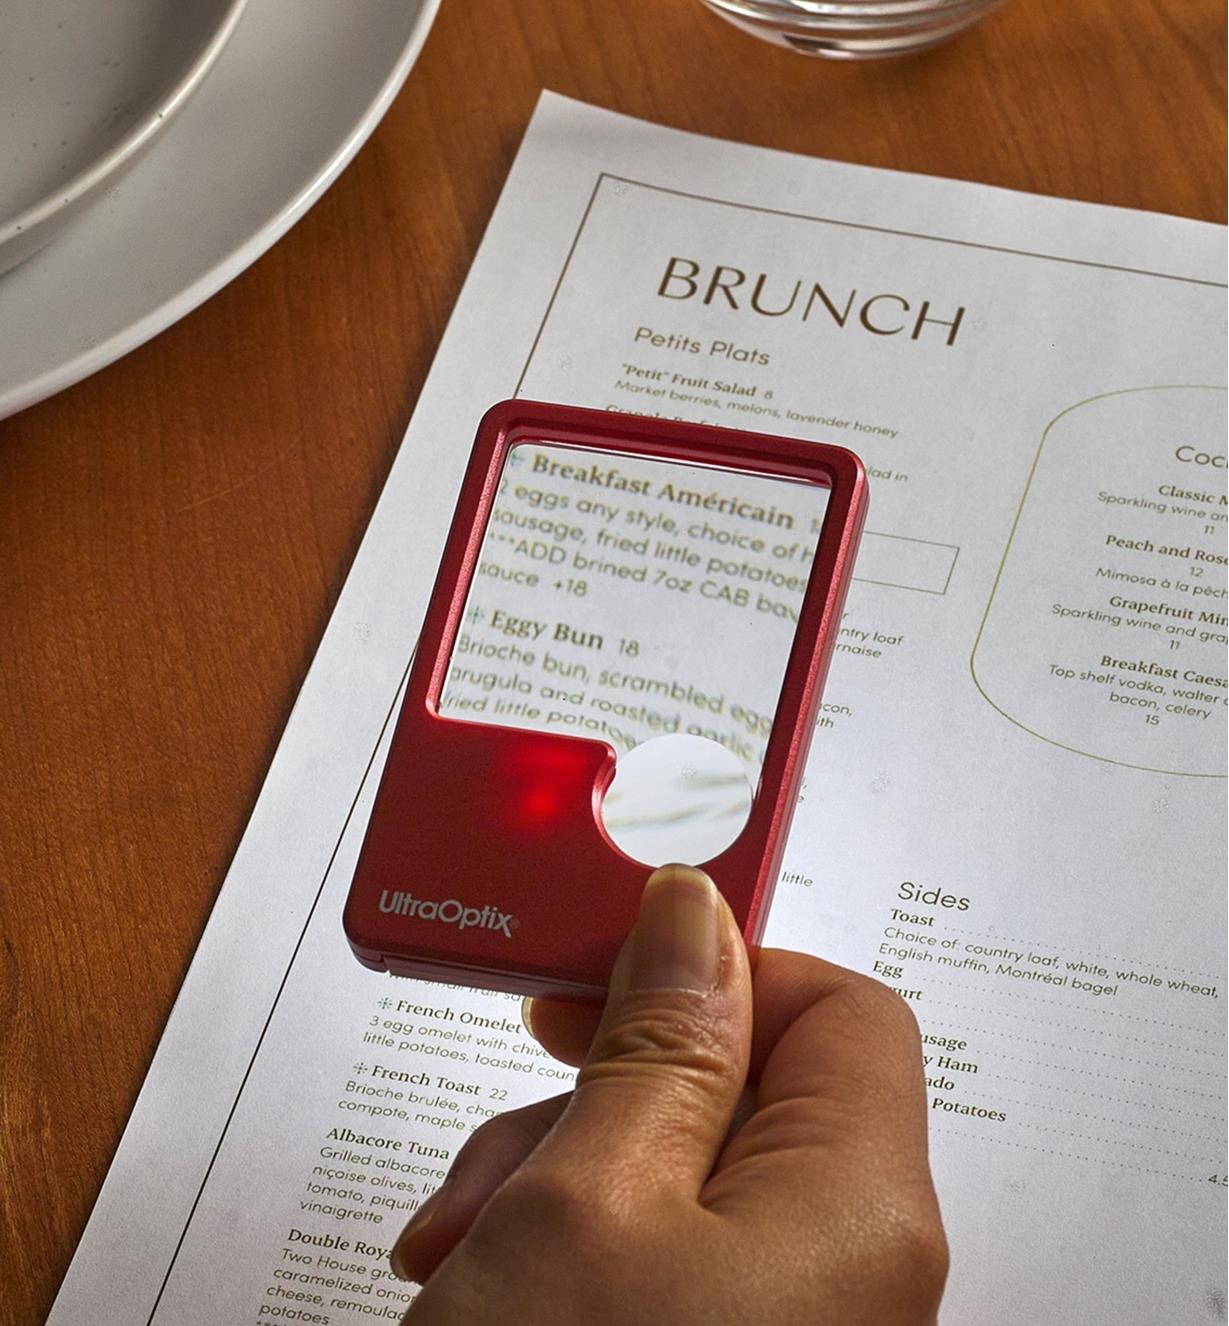 Using an LED pocket magnifier to read a menu in a dimly lit restaurant